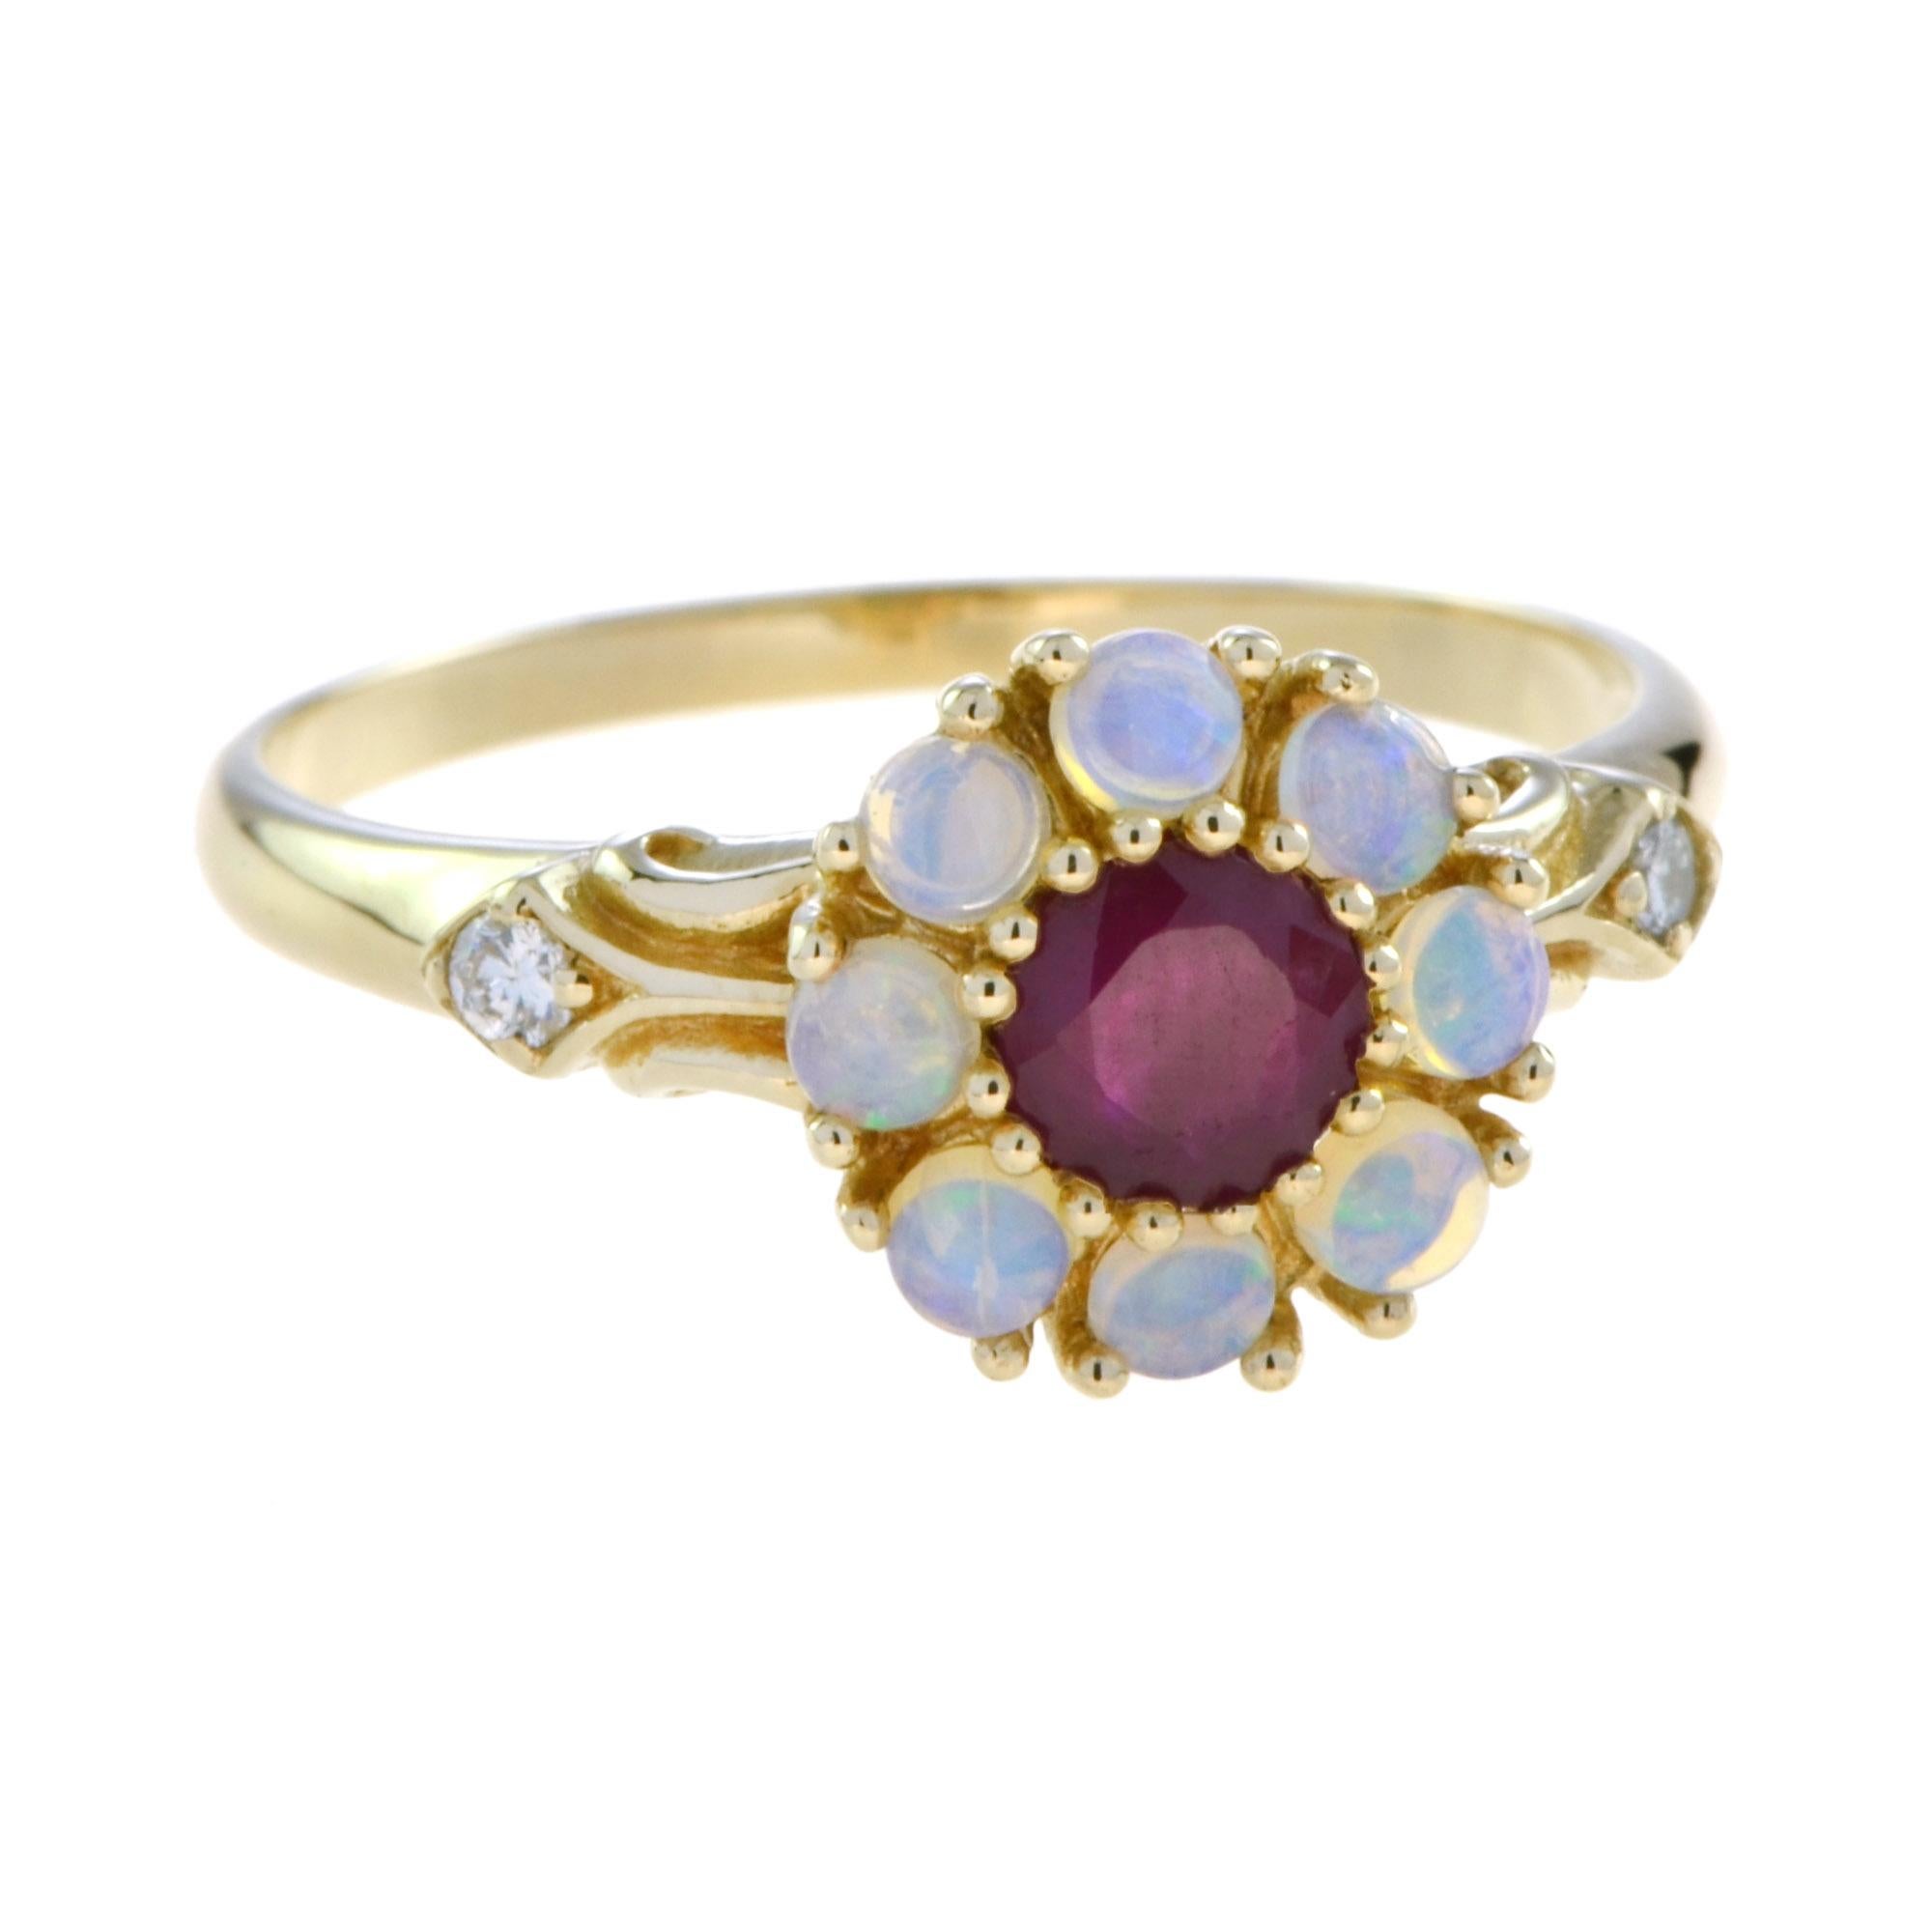 For Sale:  Vintage Style Ruby and Opal Floral Cluster Ring in 14K Yellow Gold 2